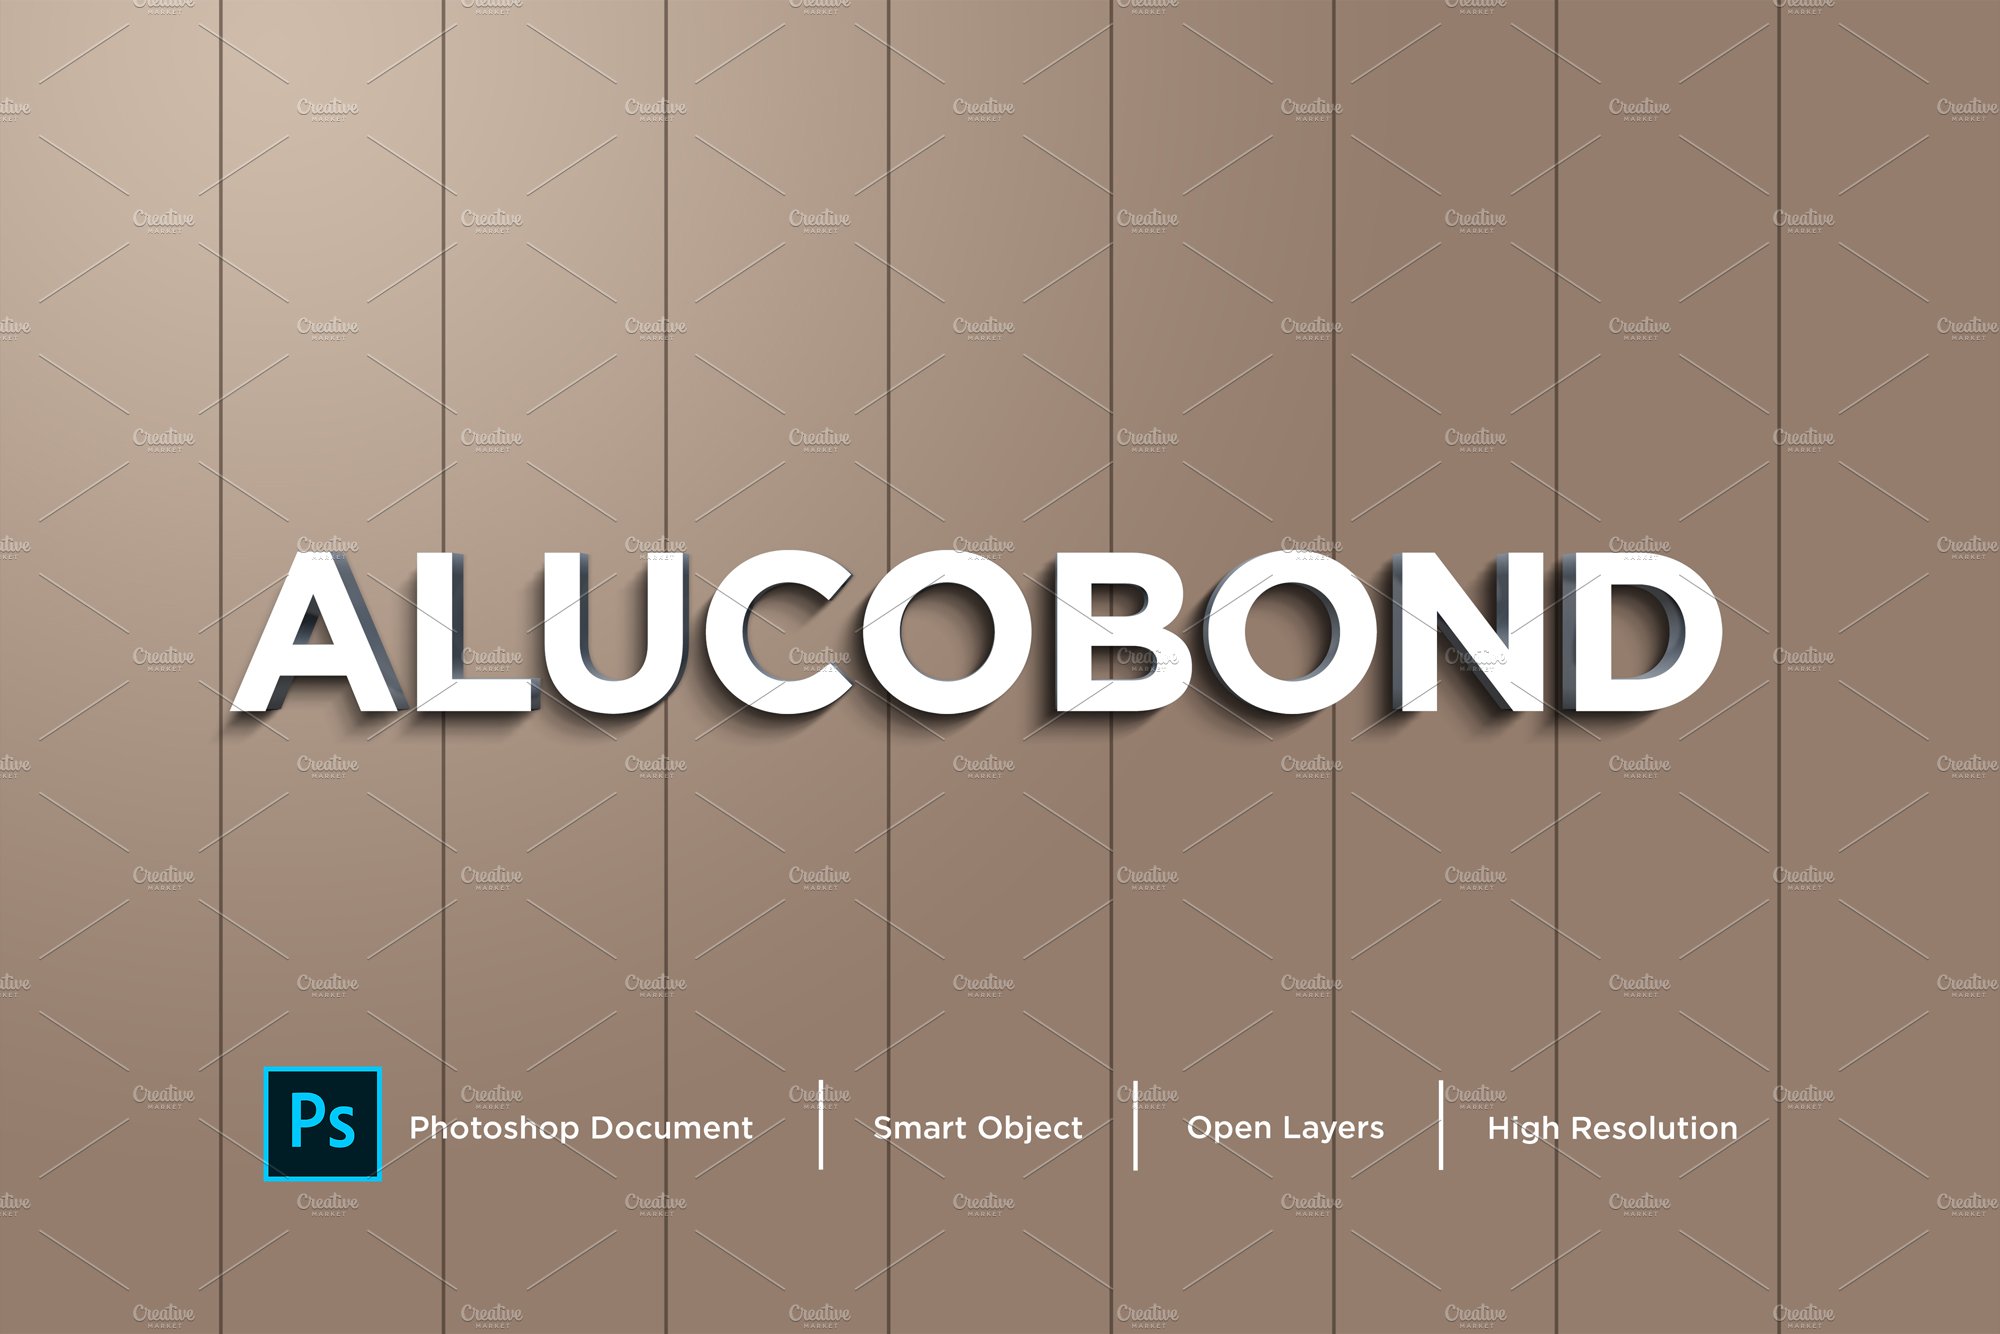 Alucobond Text Effect & Layer Stylecover image.